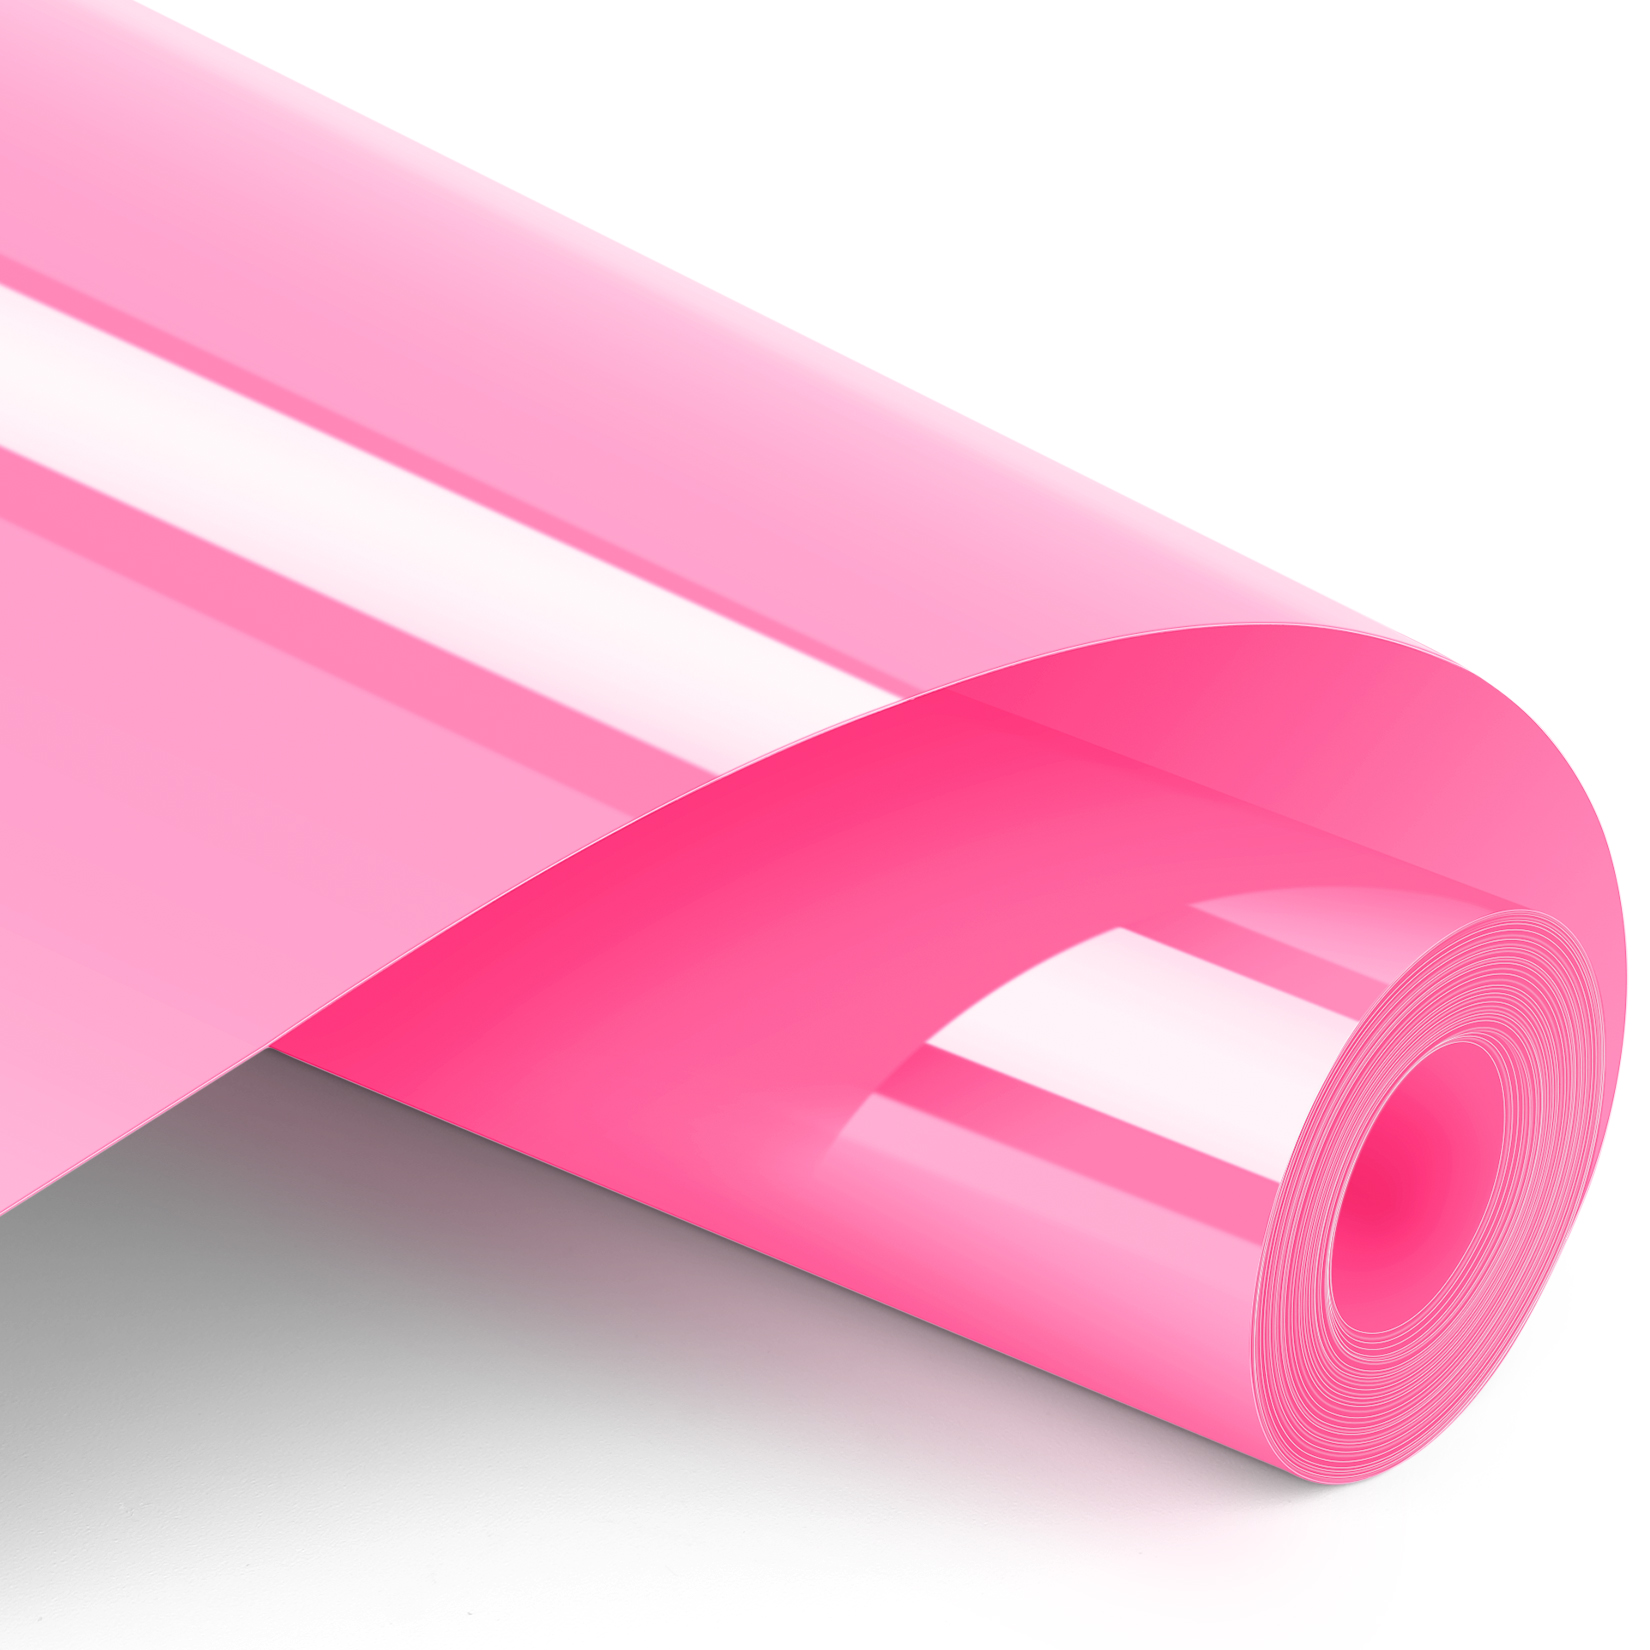 SHOMKIEE HTV Pink Heat Transfer Vinyl Rolls 12 Inch by 5 feet Roll Iron on  DIY for T-Shirt Easy to Cut & Weed for Heat Vinyl Des